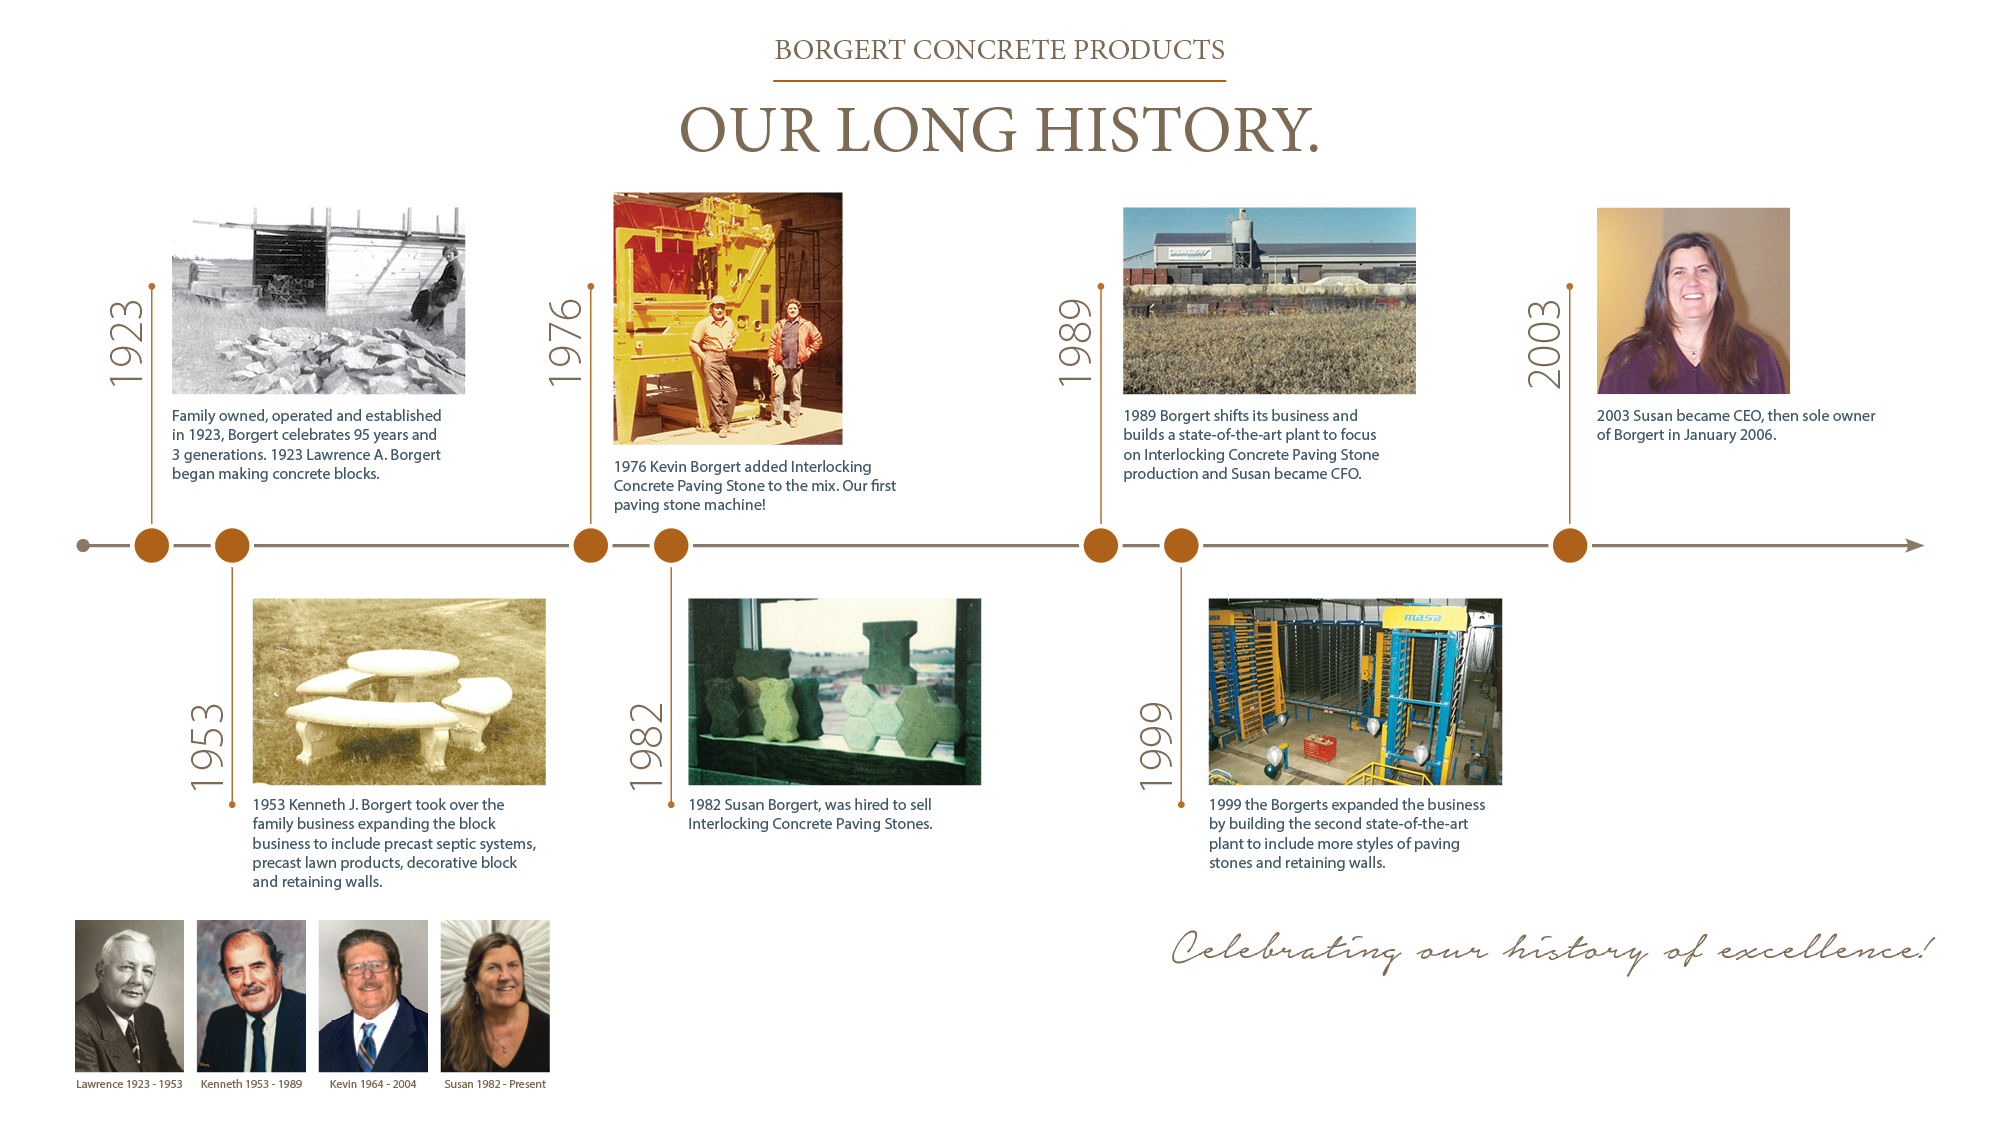 Borgert Products - Our History - Timeline